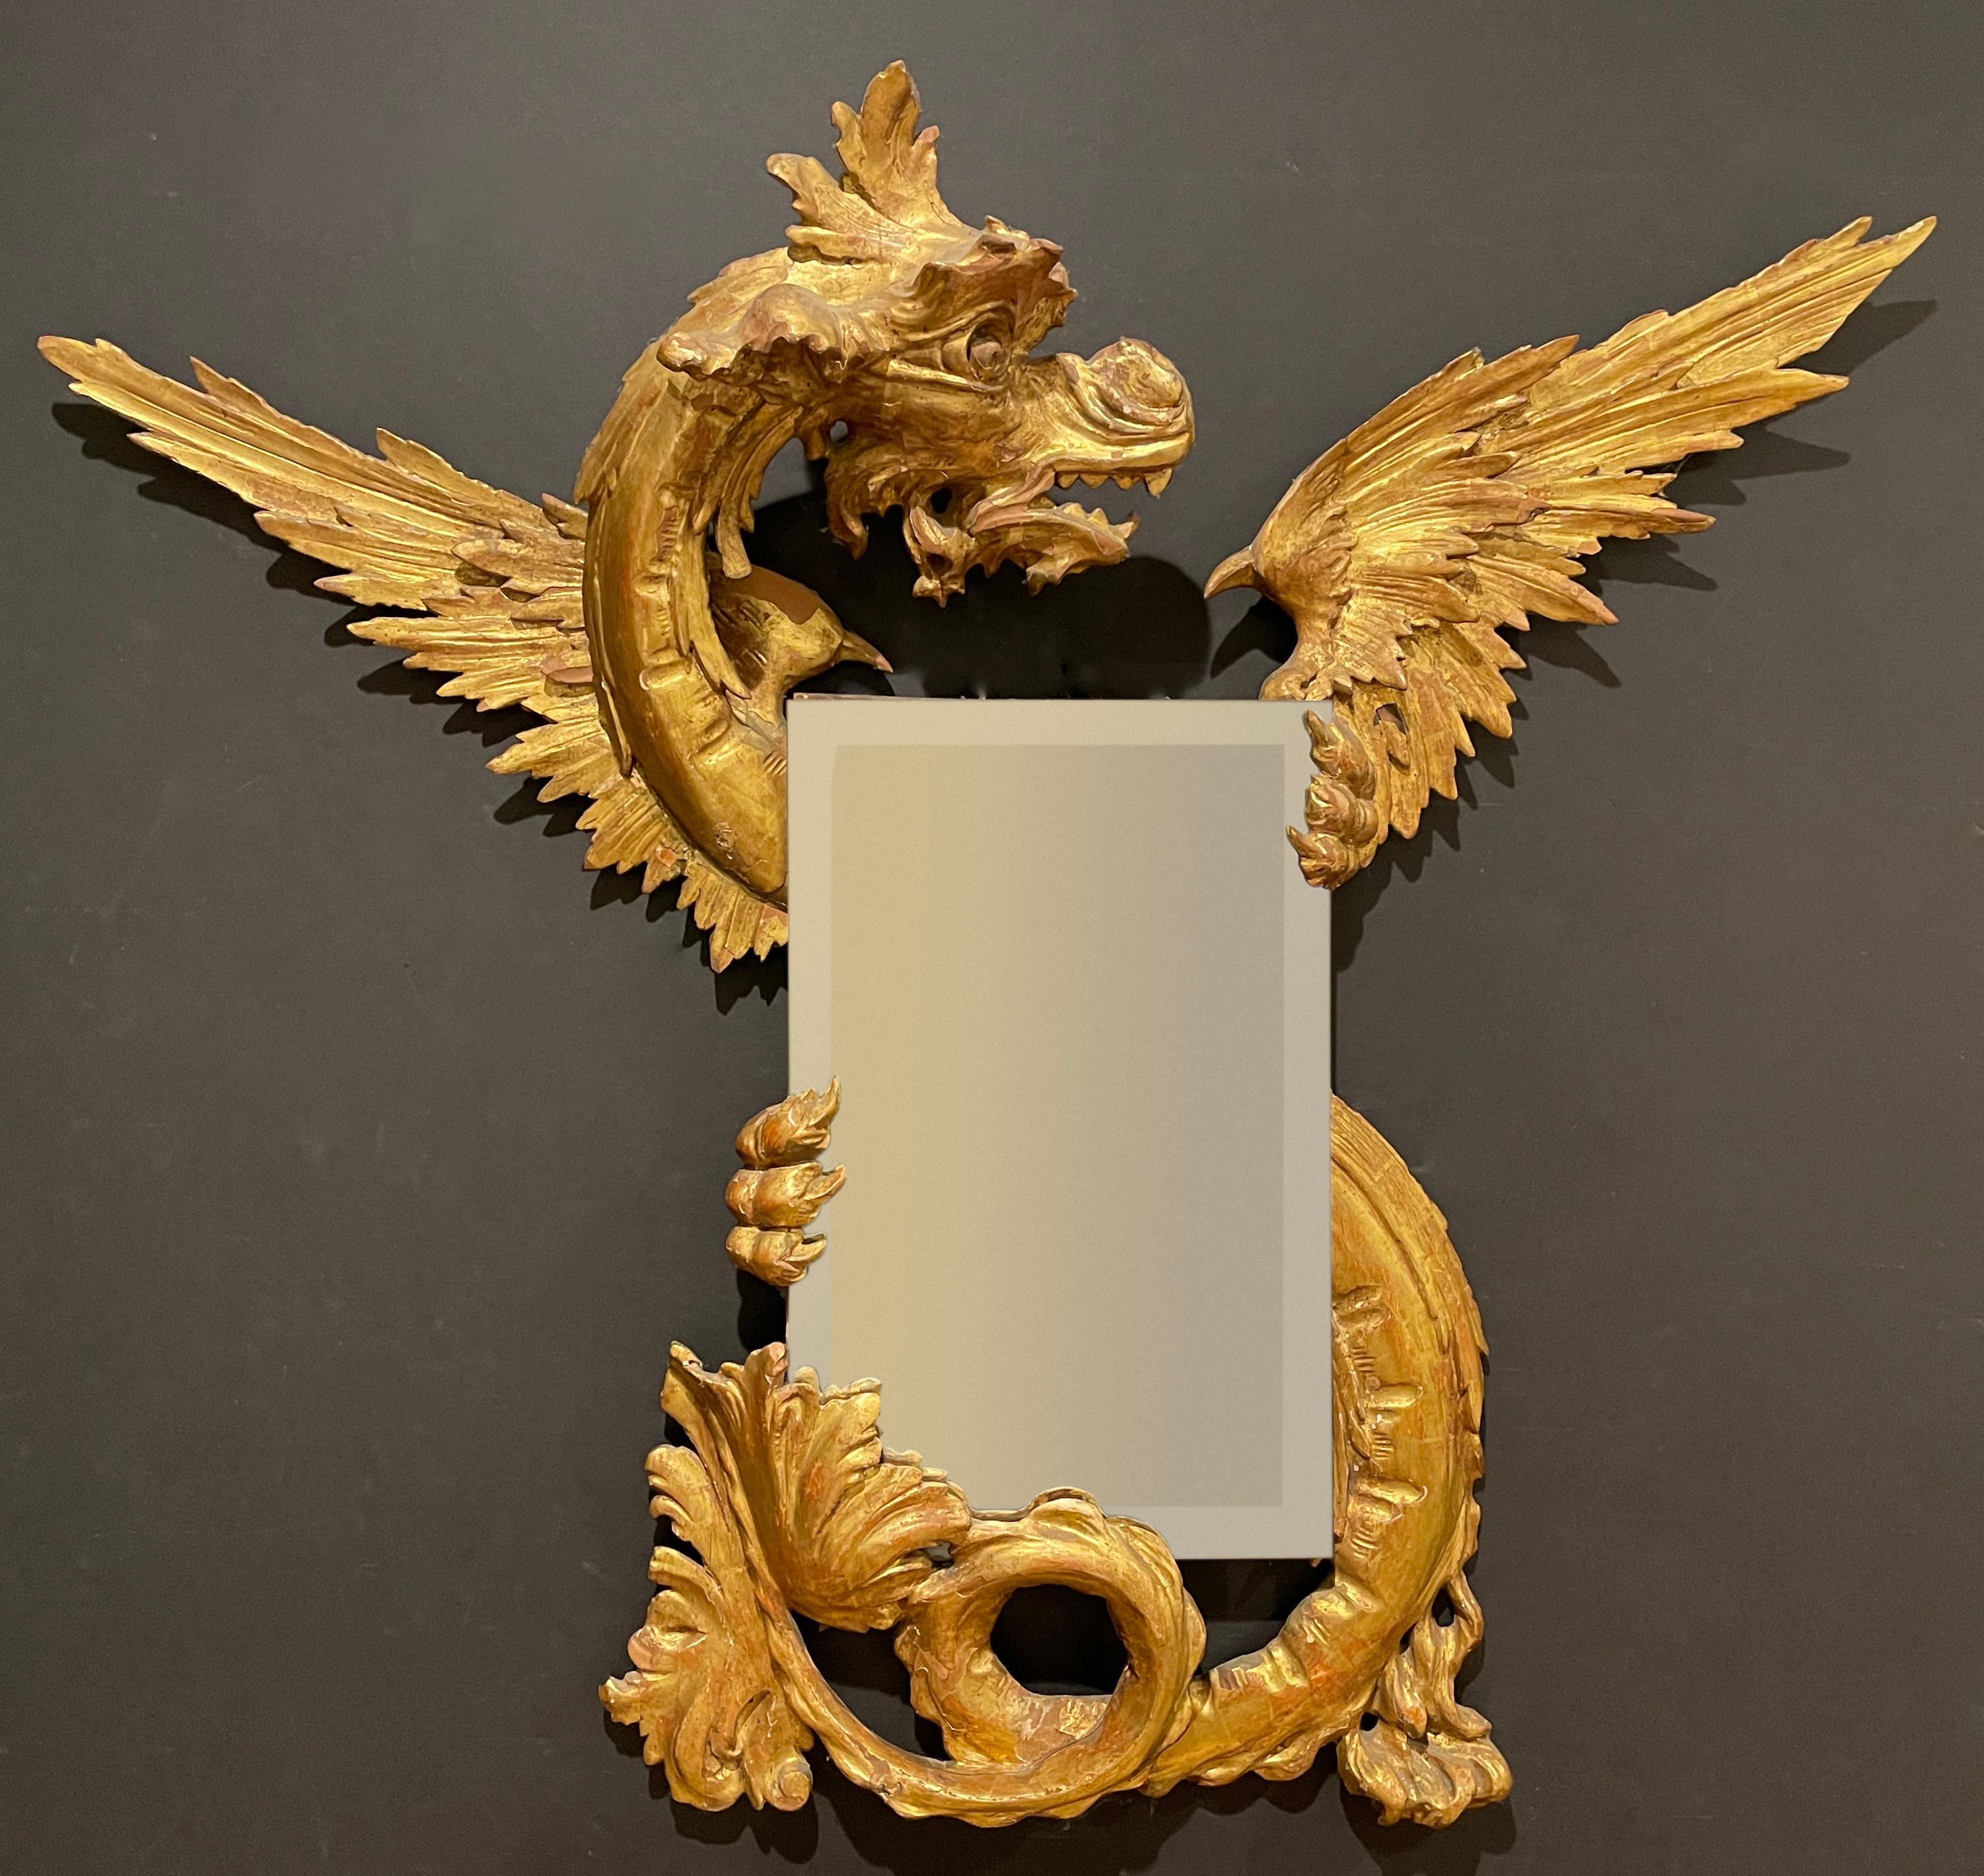 Wonderfully carved and gilt dragon form mirror. Northern Italian 19th century in the Renaissance style. beveled mirror held between the hands/claws and tail
 